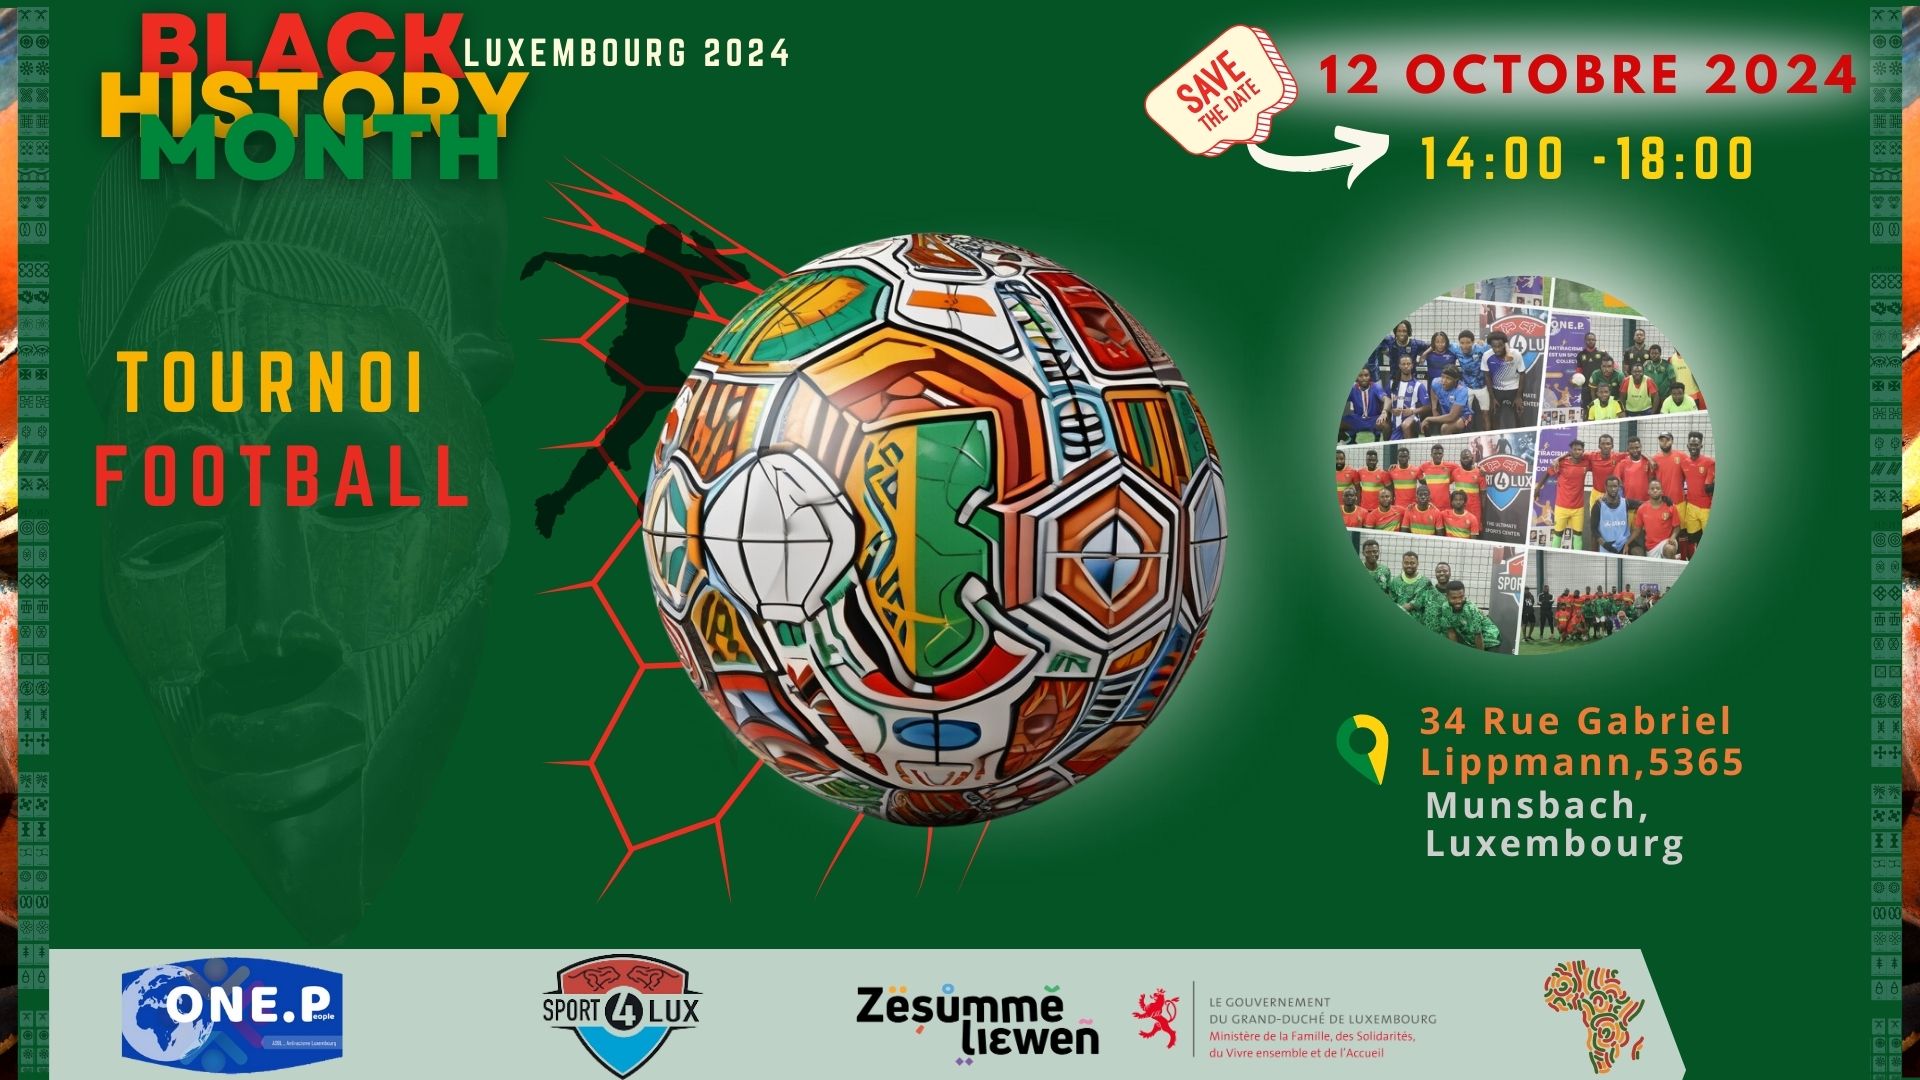 Tournoi de football; Antiracisme Luxembourg; One people Luxembourg; Black History month Octobre 2024